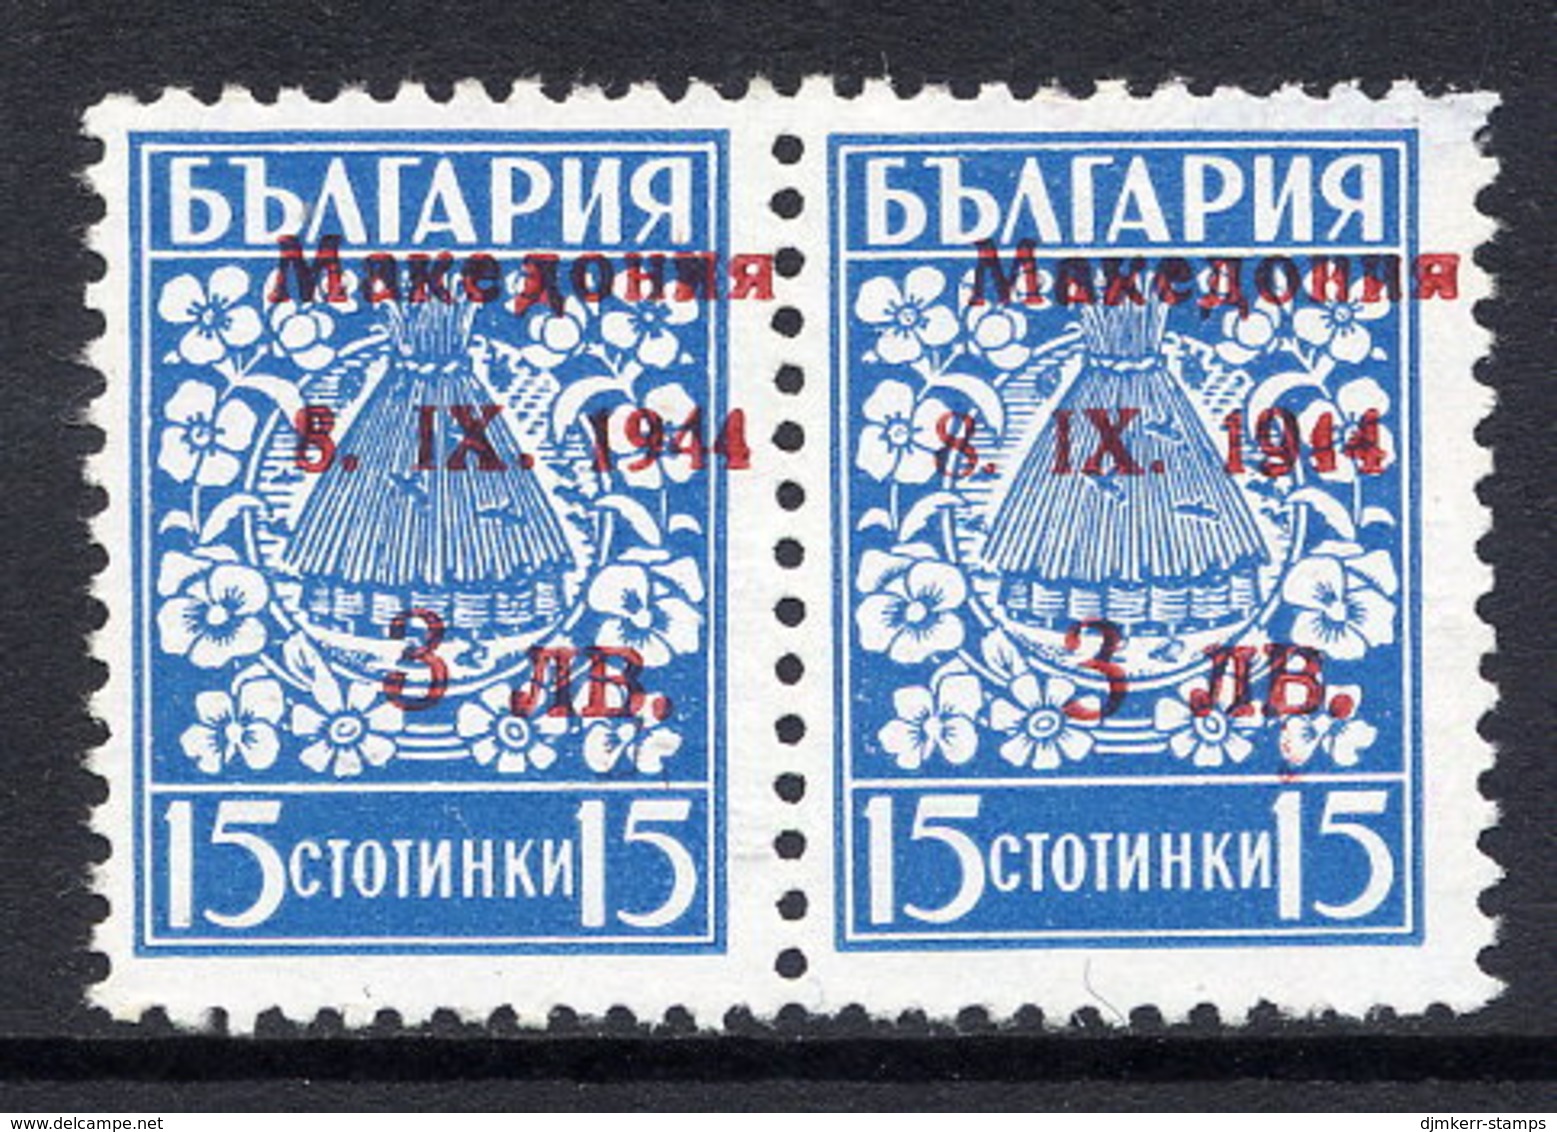 MACEDONIA 1944 3 L. On 15 St. Both Types In Pair Unused Without Gum..  Michel 2 I-II - Besetzungen 1938-45